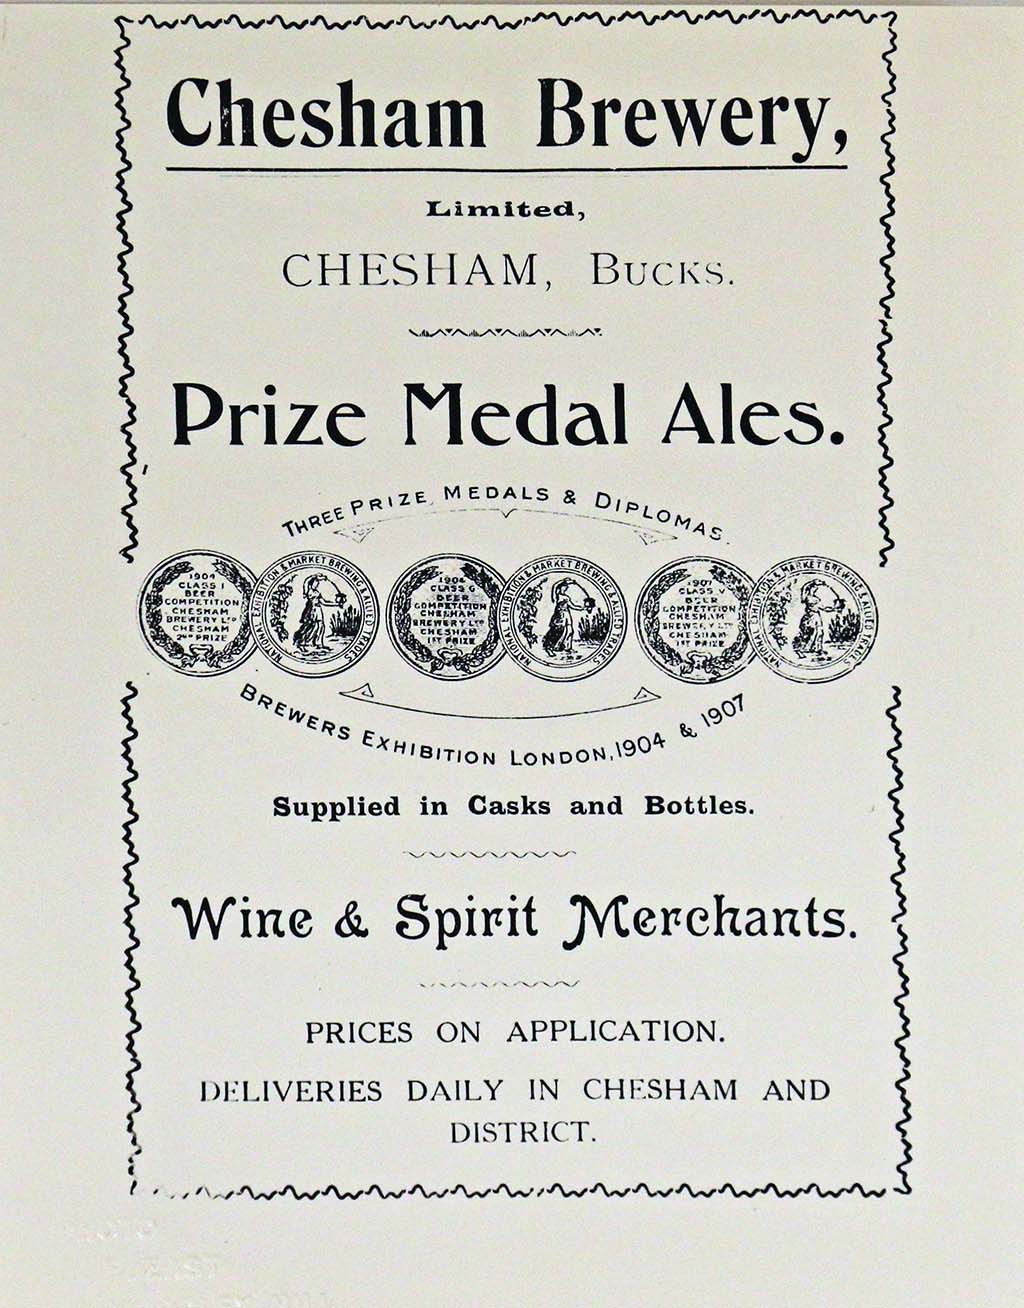 Advertisement for Chesham Brewery prize medal ales, wine and spirits merchants.